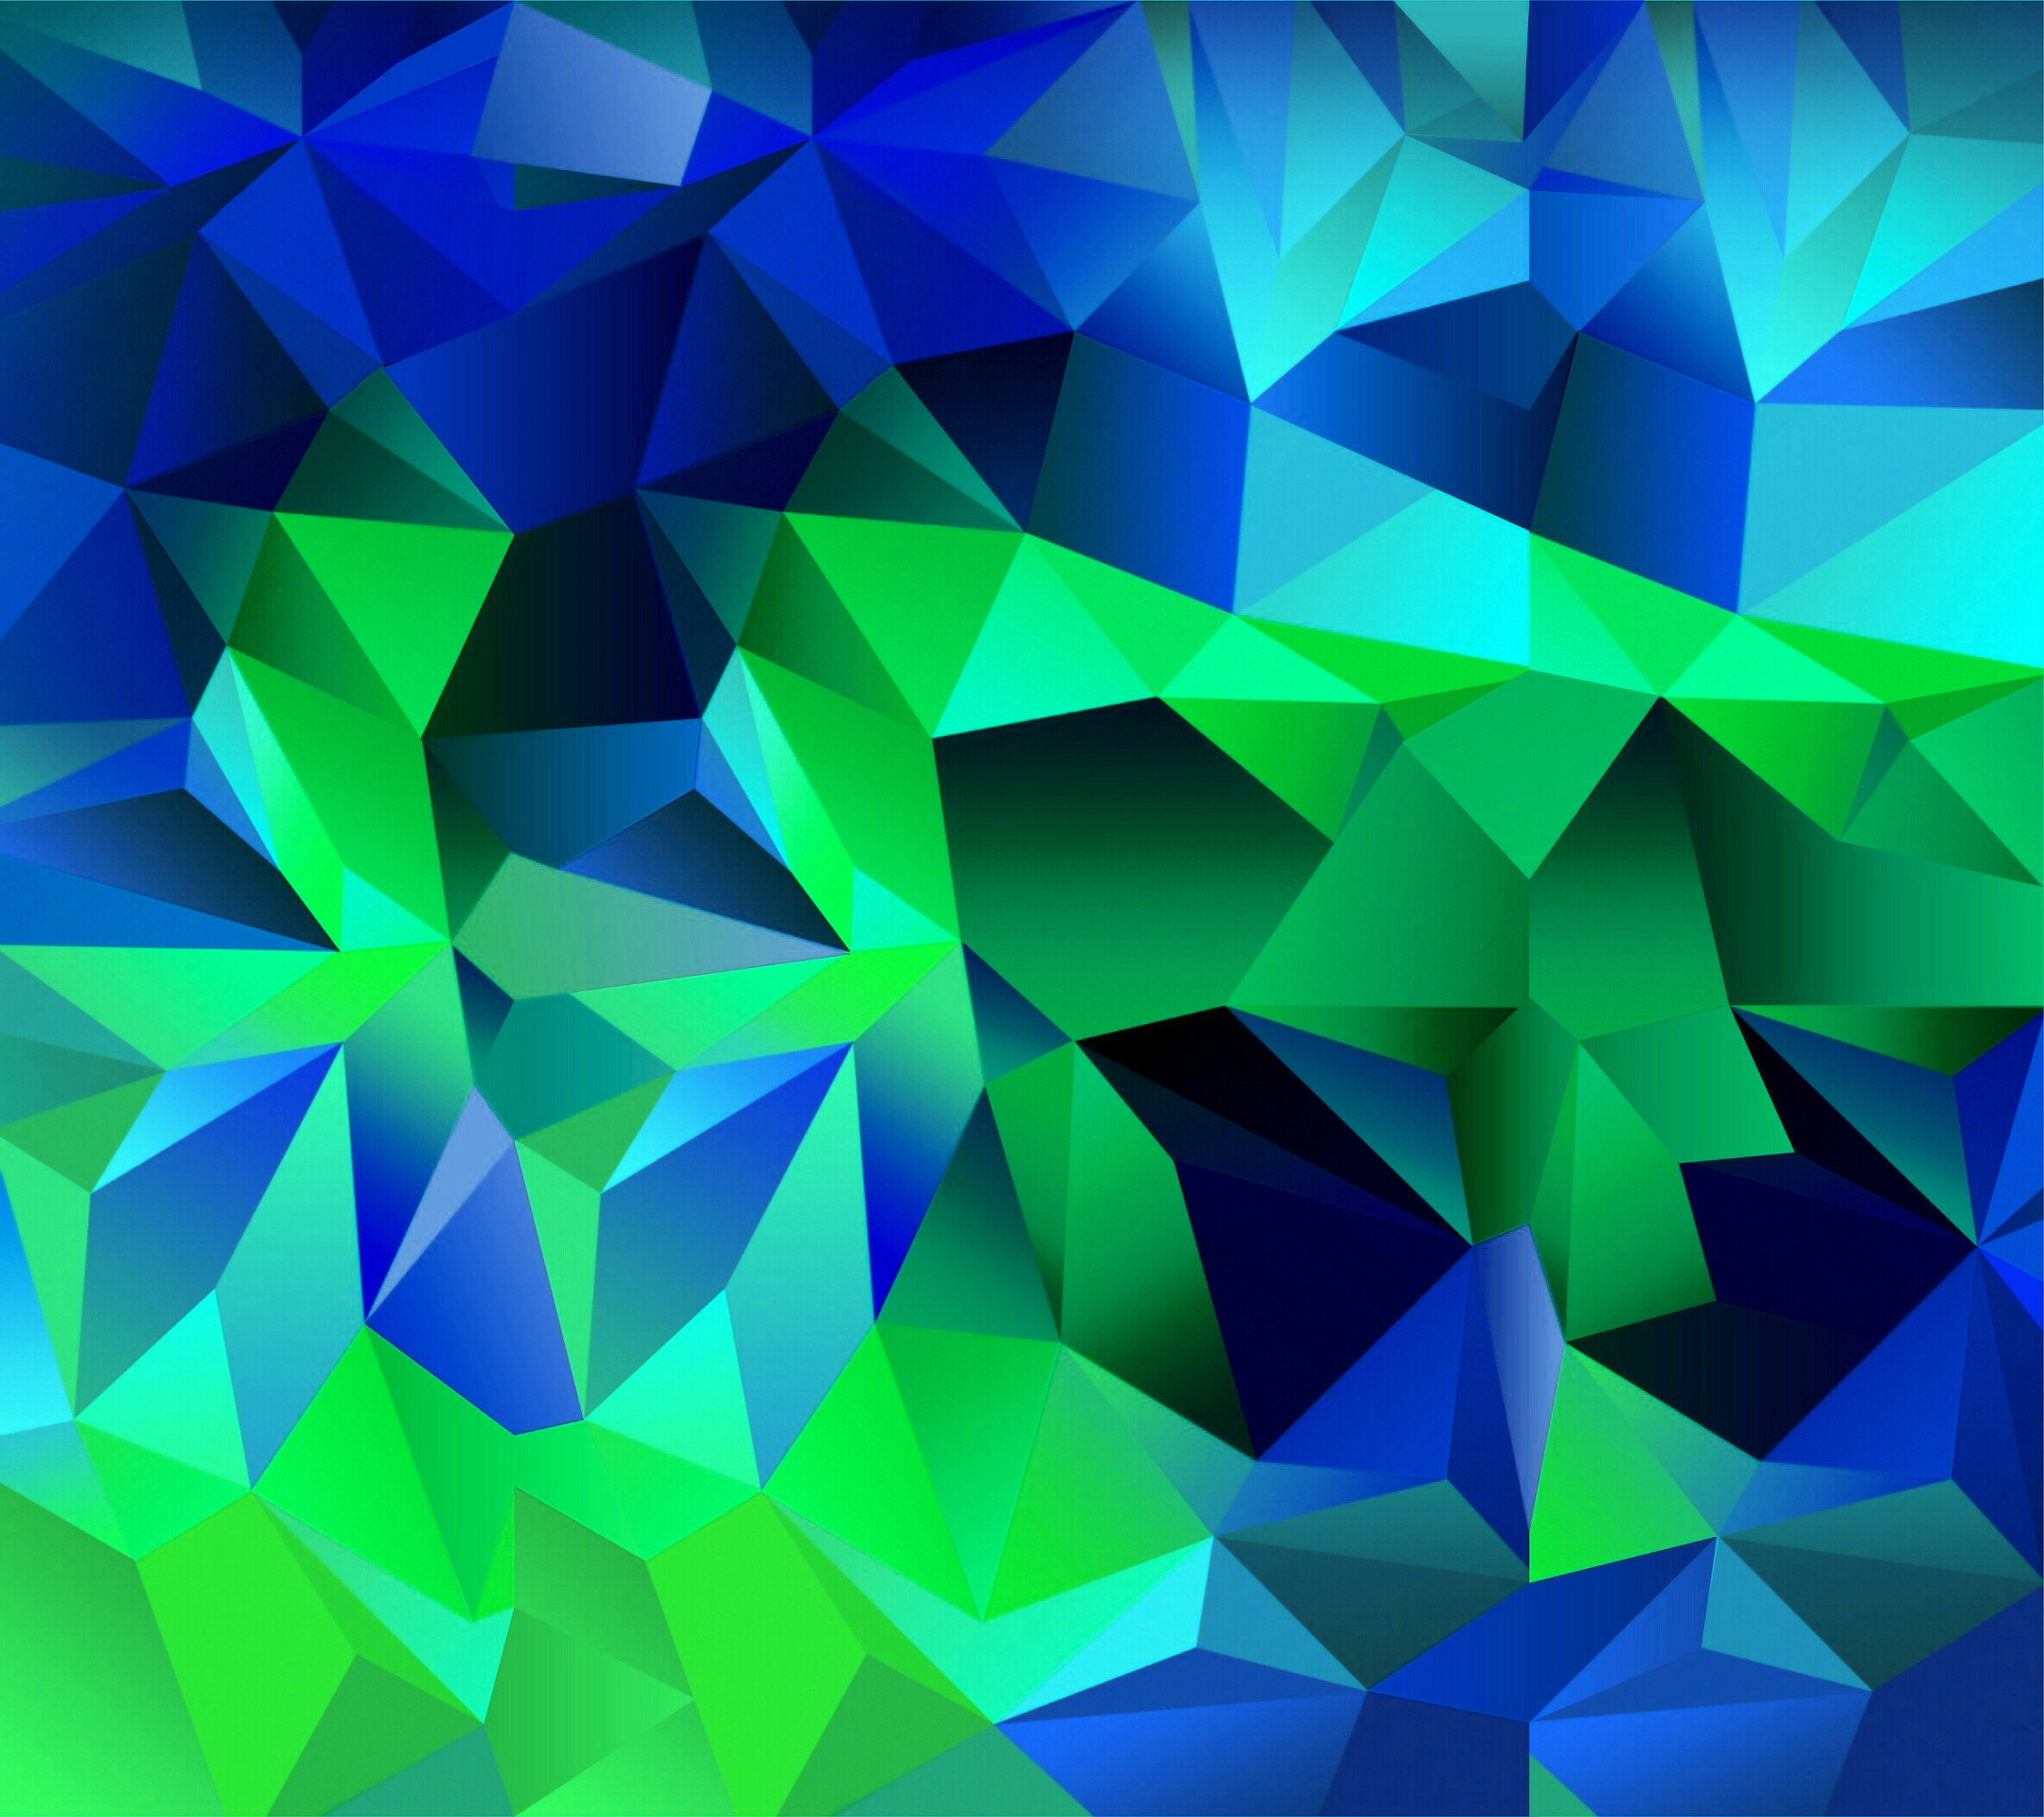 2160x1920 The blue & green #Samsung #GalaxyS5 #Wallpaper I just pinned! http: